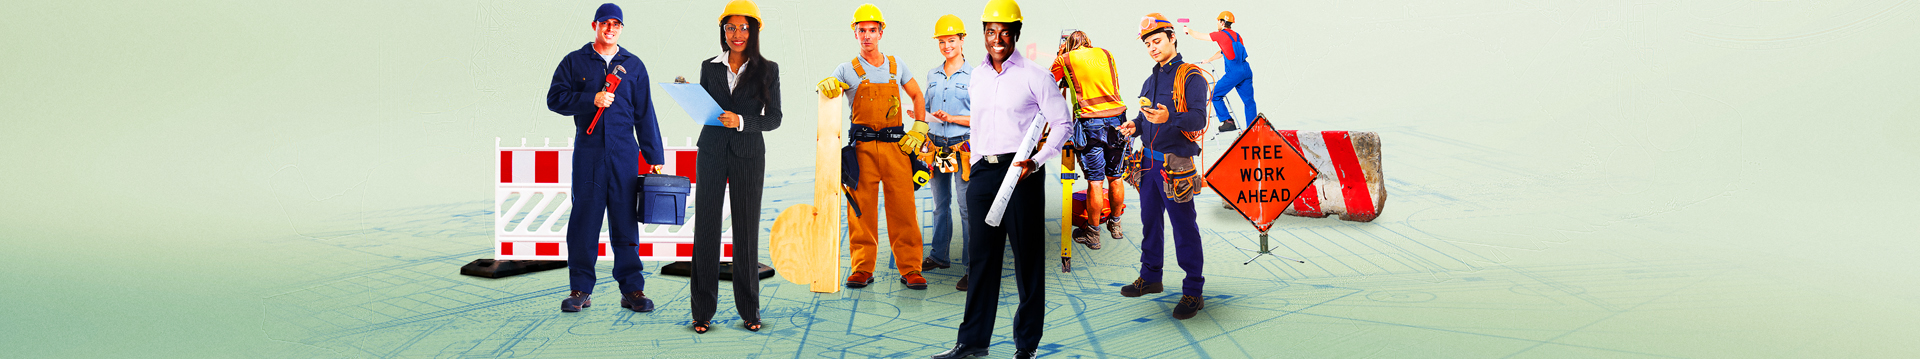 A photo illustration of various public works professionals, all of whom are represented by APWA